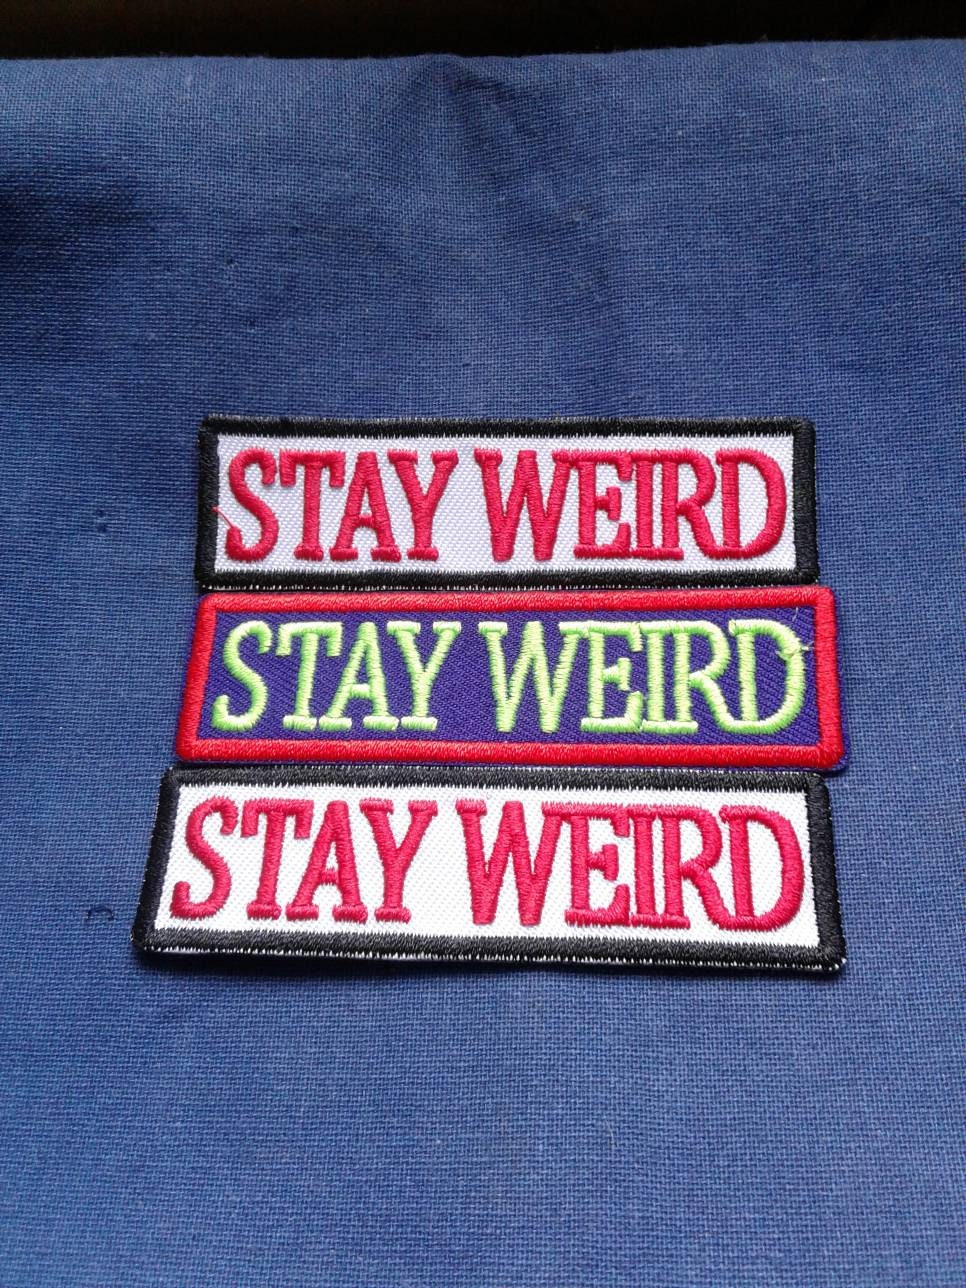 Stay Weird Iron on Patch for Jackets, Iron Patches Vintage, Puffy Chenille  Large Punk Patches, Embroidered Rainbow Patch for Jackets 